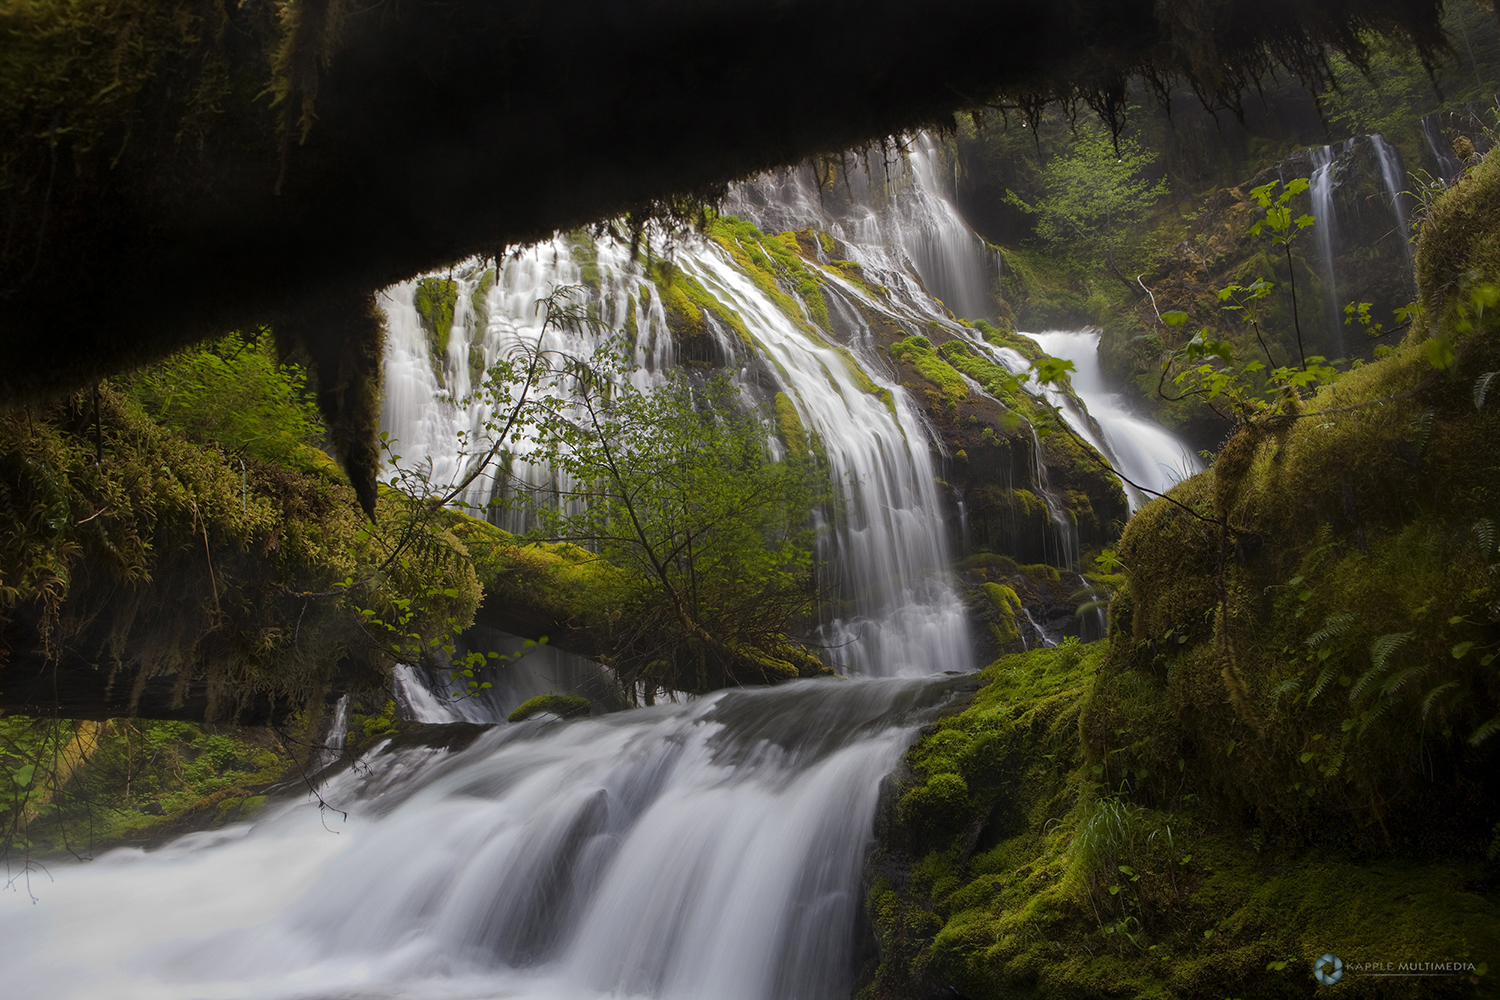 Panther Creek Falls in temperate rainforest, Gifford Pinchot National Forest, Washington